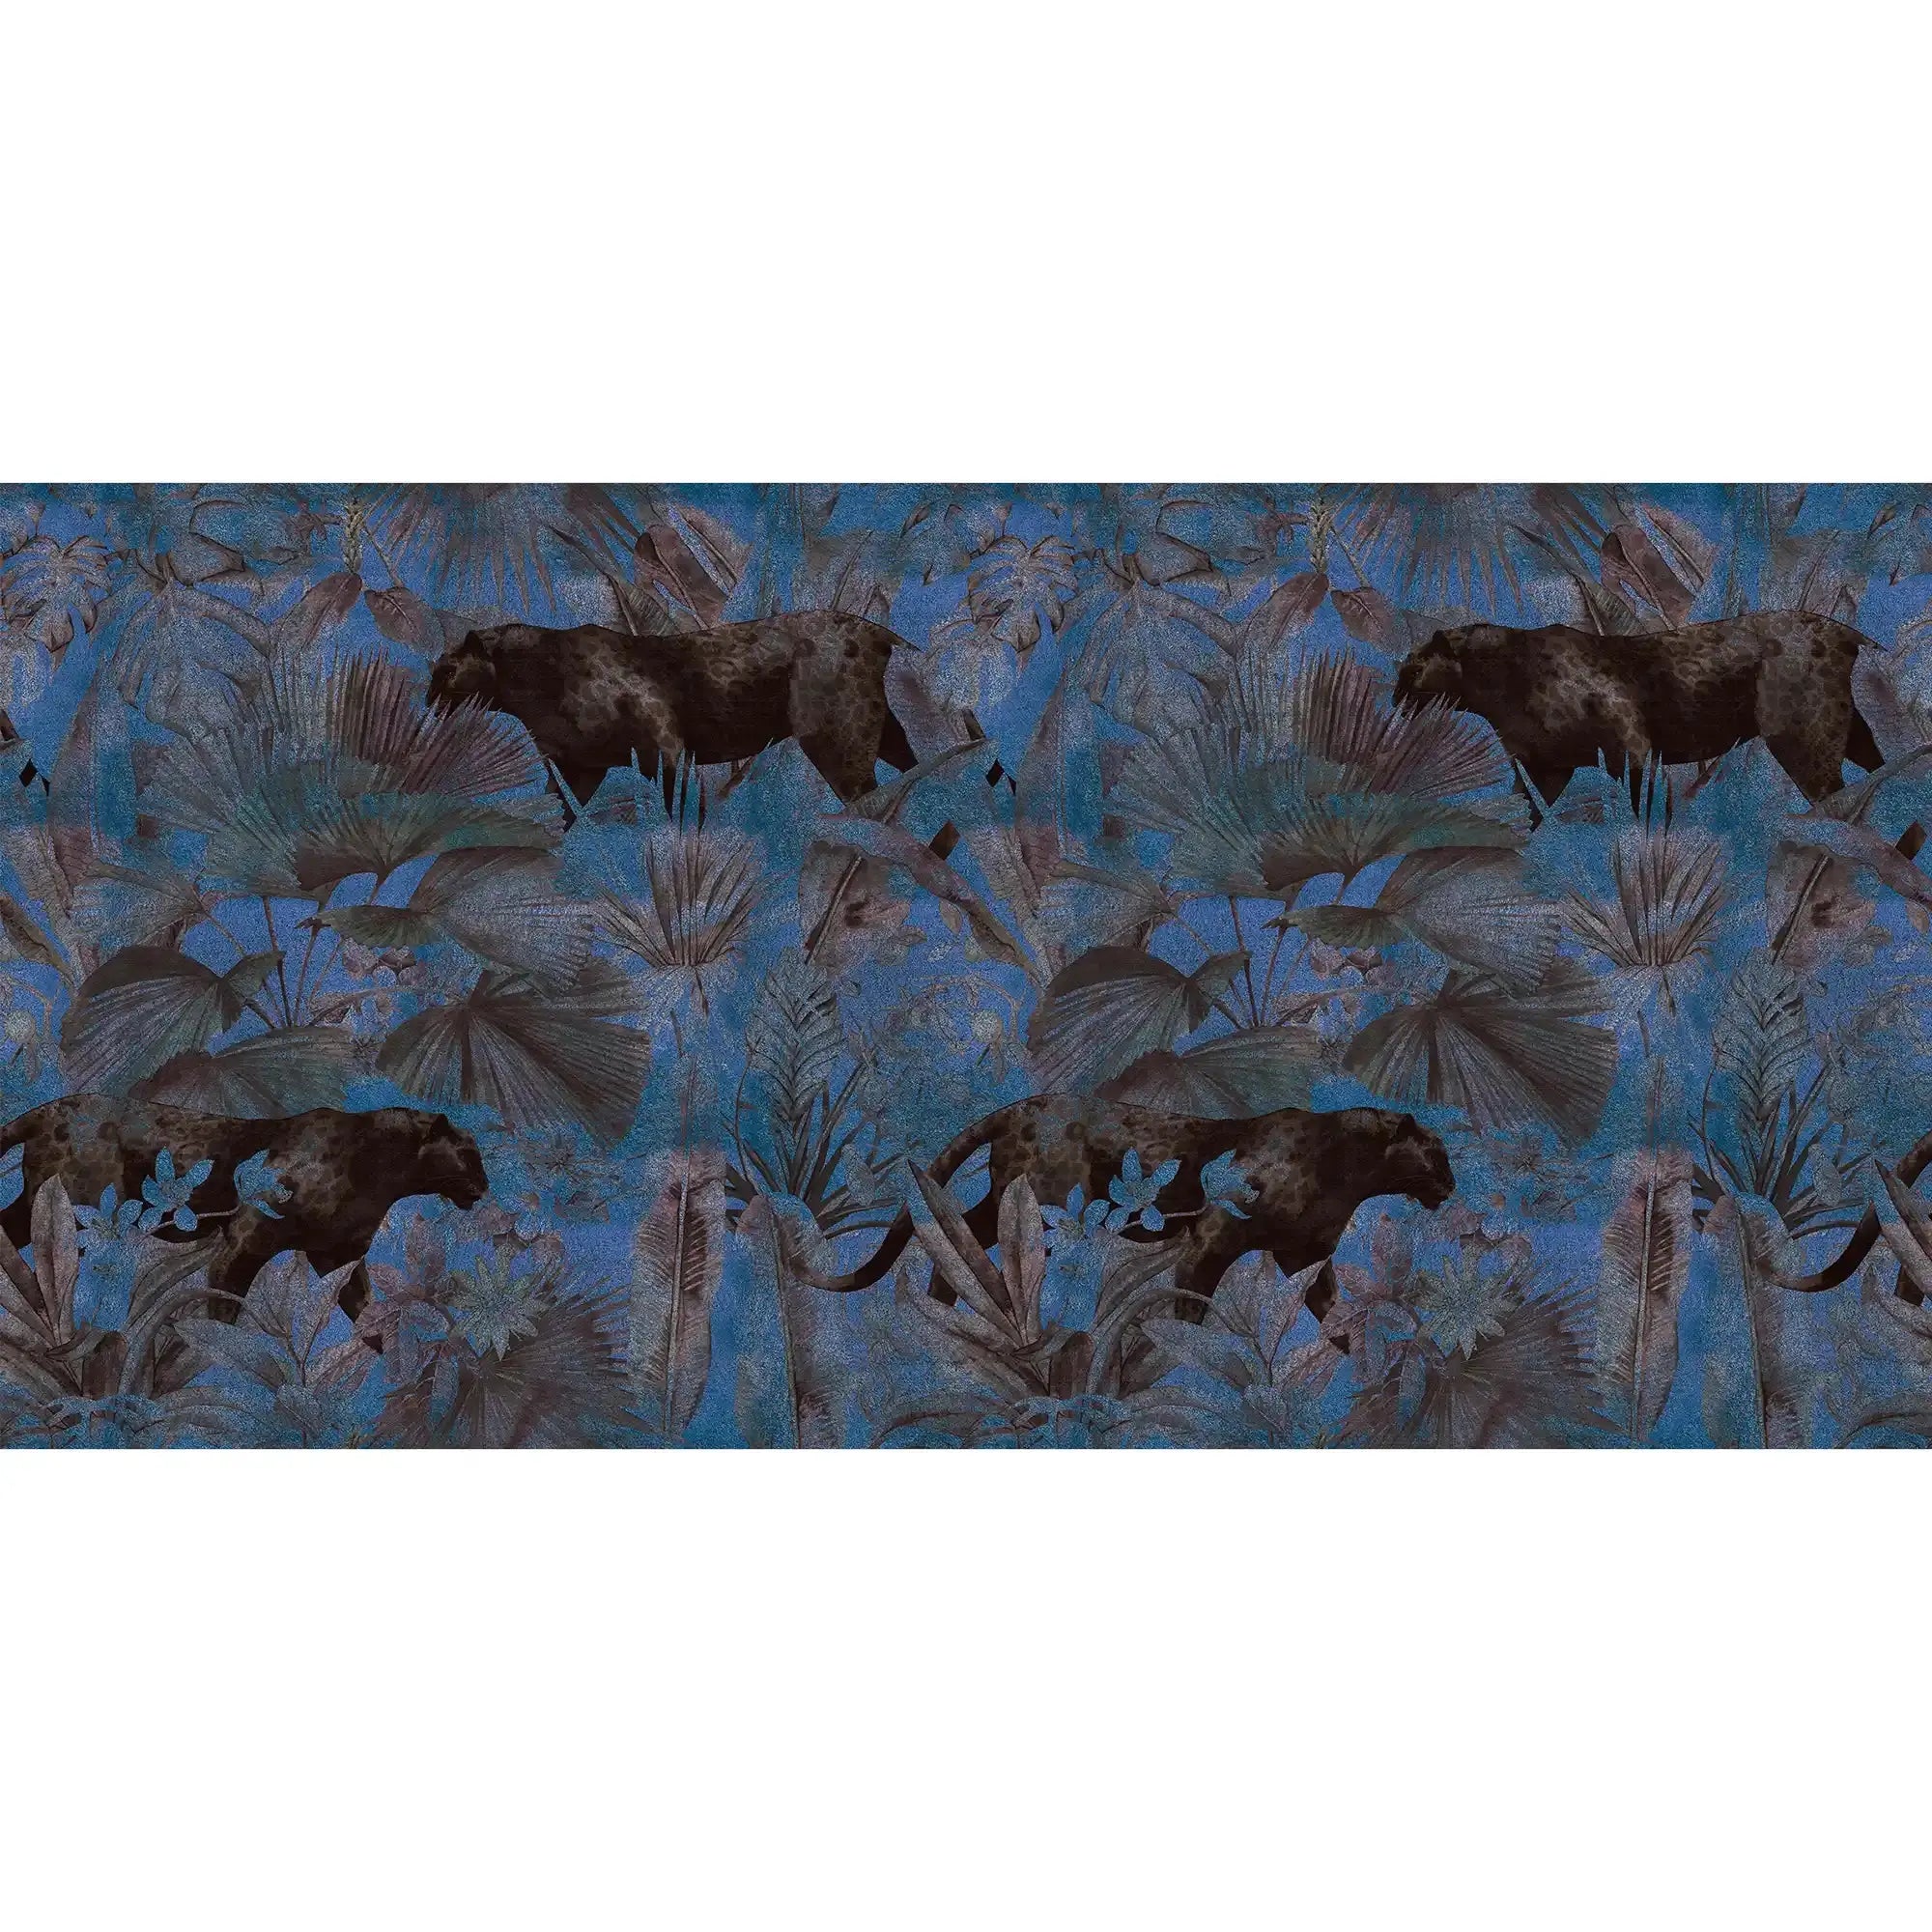 3076-C / Botanical Wallpaper with Panther Theme: Adhesive Mural for Wall Accent - Artevella